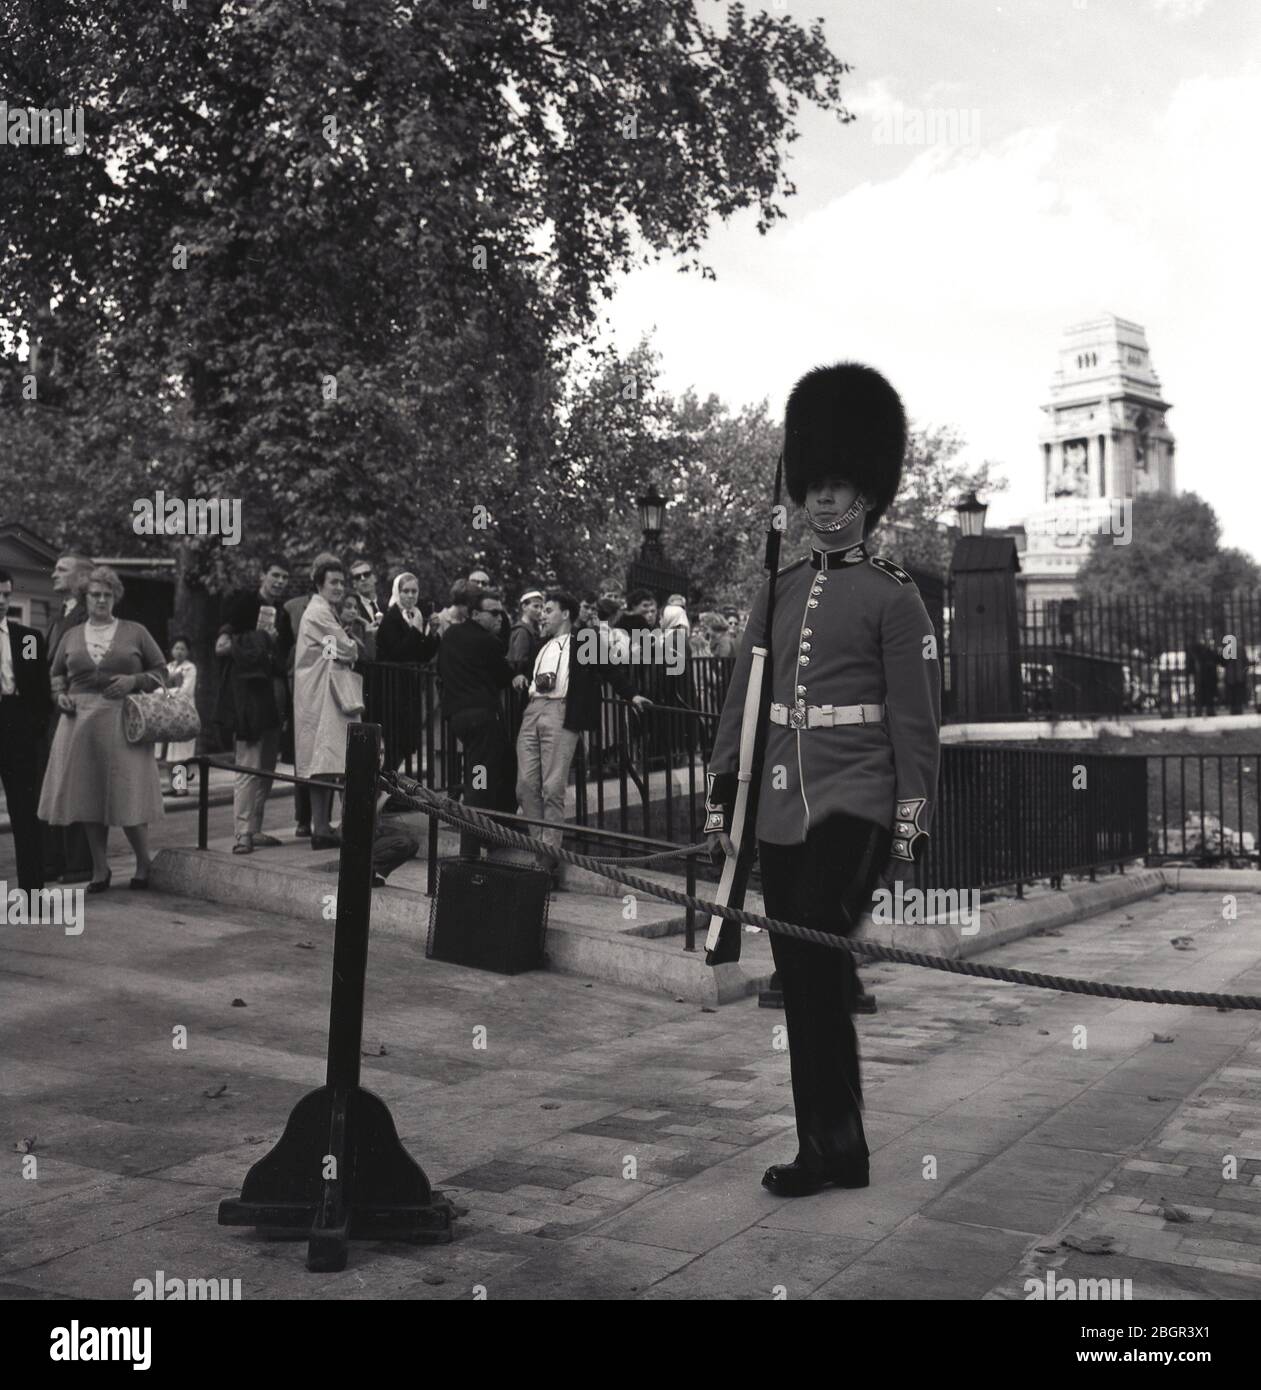 1960s, historical, St James Palace, London, England, UK, spectators watching a Queens Guard of the British Army's Household Division performing ceremonial duties. Stock Photo